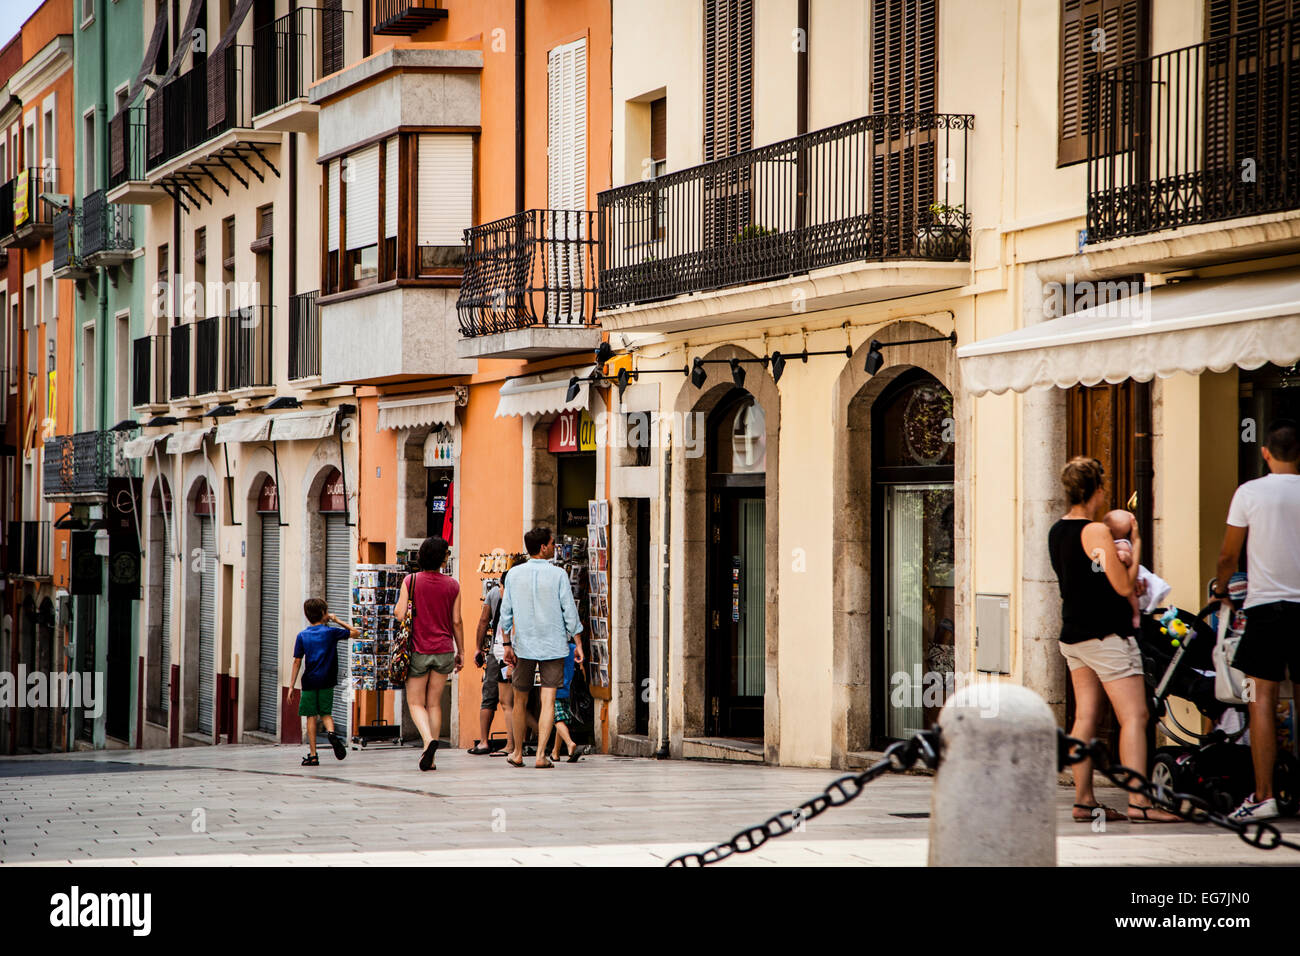 Shopping street in Figueres, Spain Stock Photo